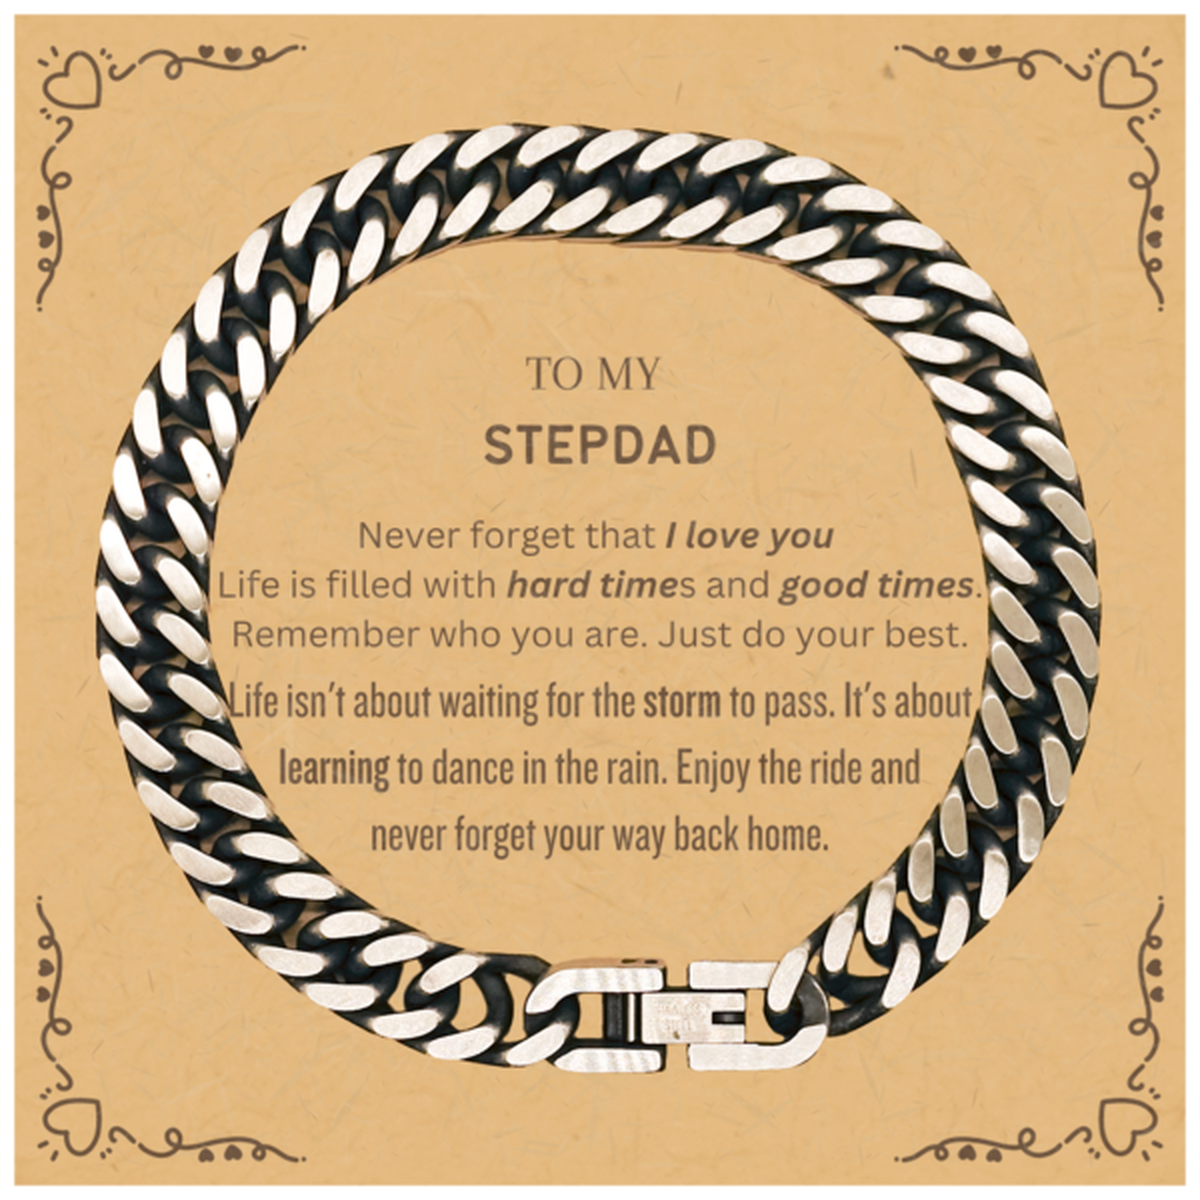 Christmas Stepdad Cuban Link Chain Bracelet Gifts, To My Stepdad Birthday Thank You Gifts For Stepdad, Graduation Unique Gifts For Stepdad To My Stepdad Never forget that I love you life is filled with hard times and good times. Remember who you are. Just